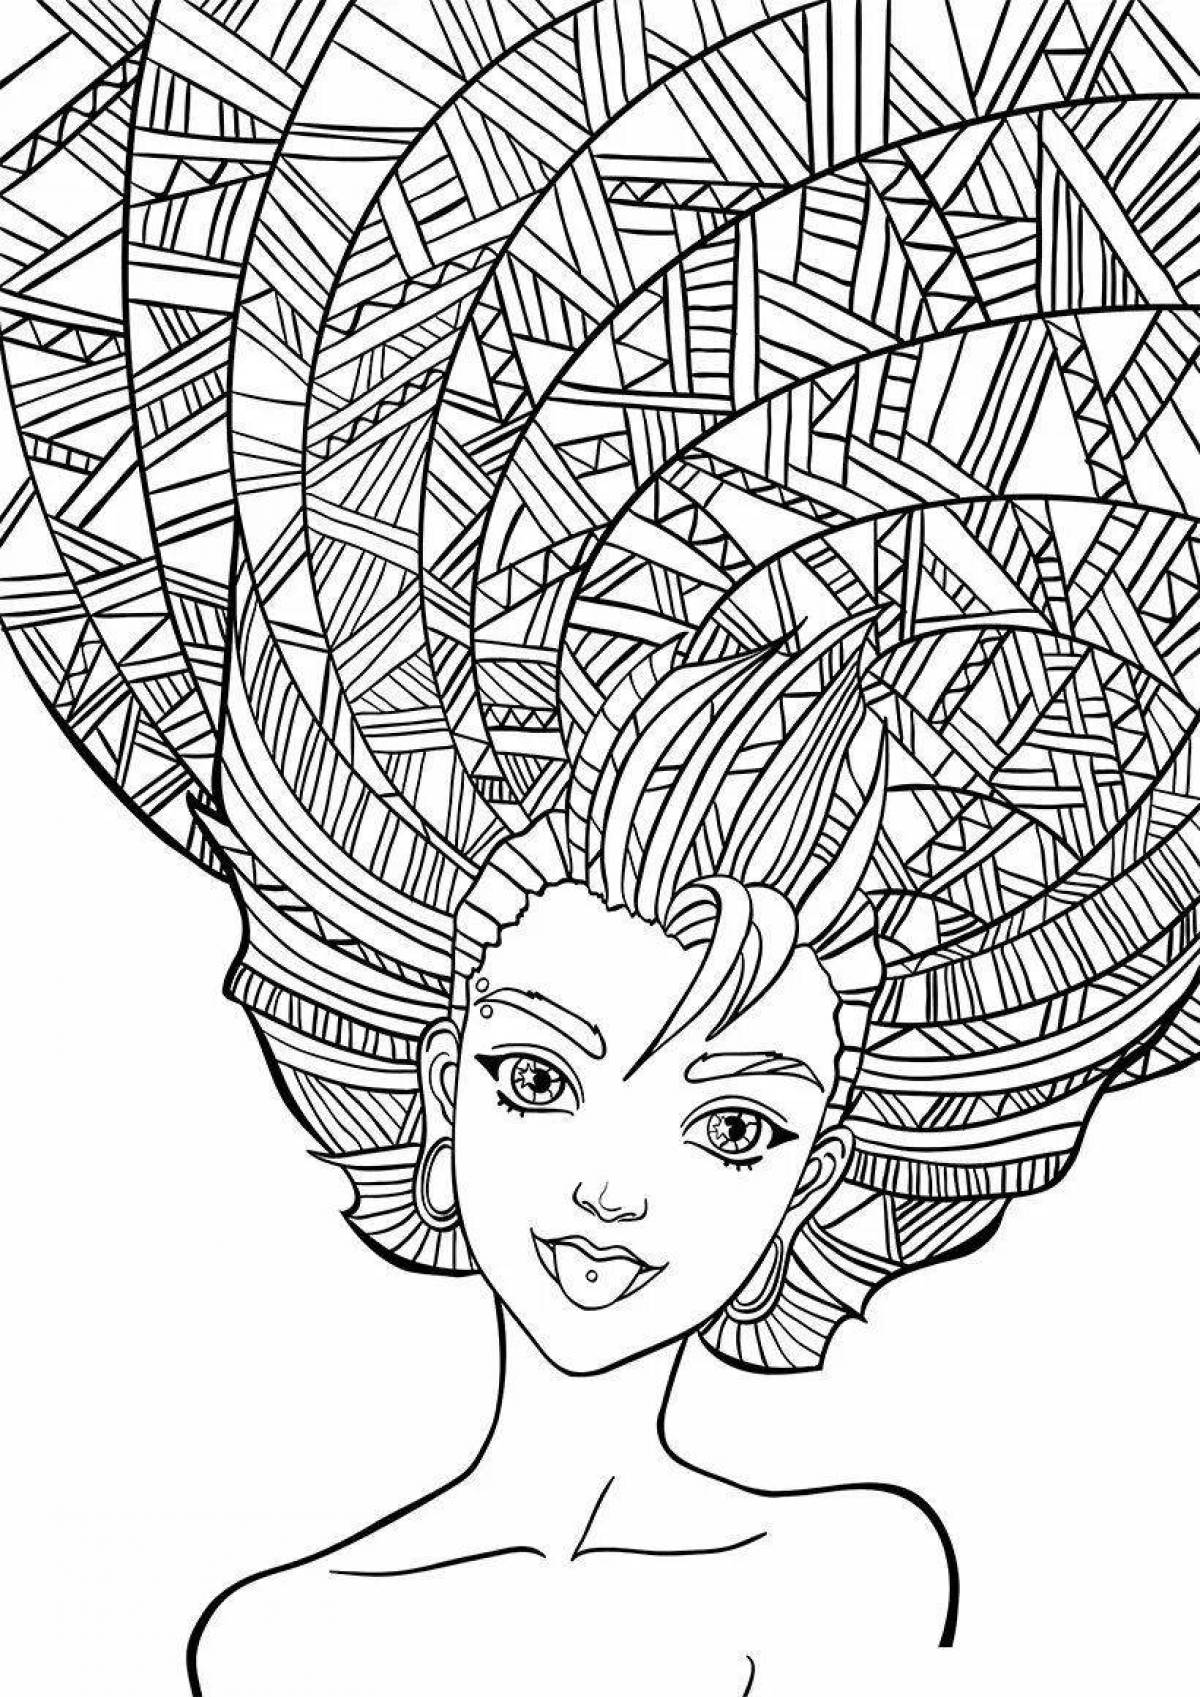 Adorable coloring book for adults and children